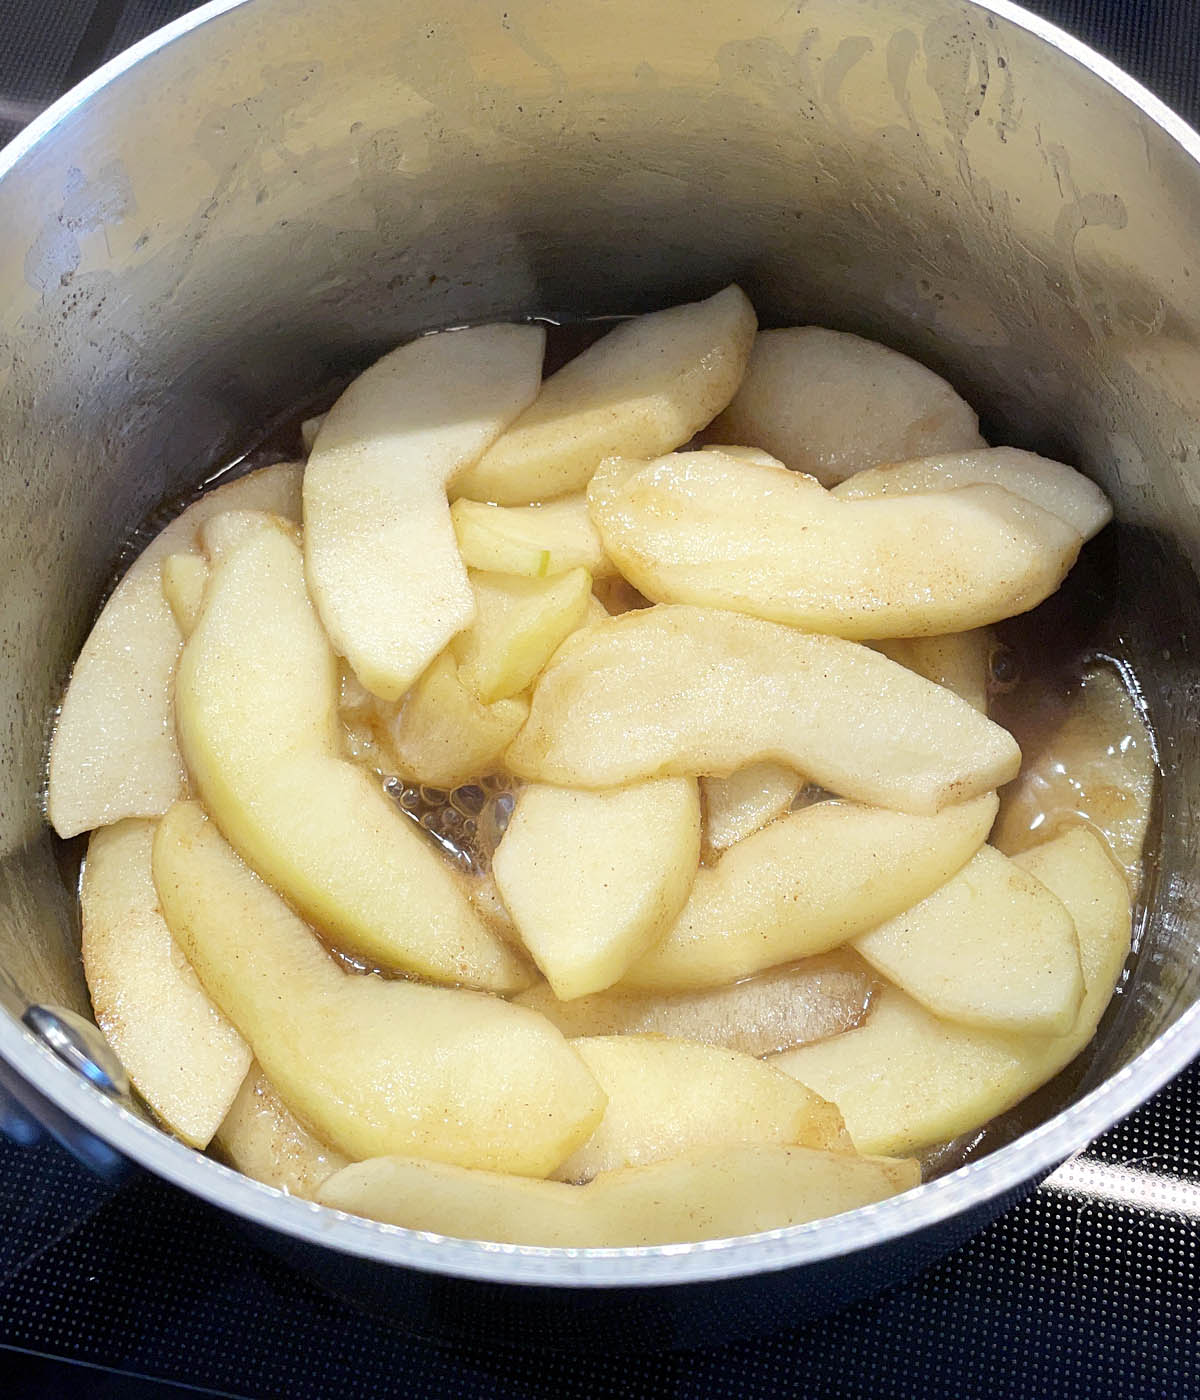 Apple slices in a metal pot.